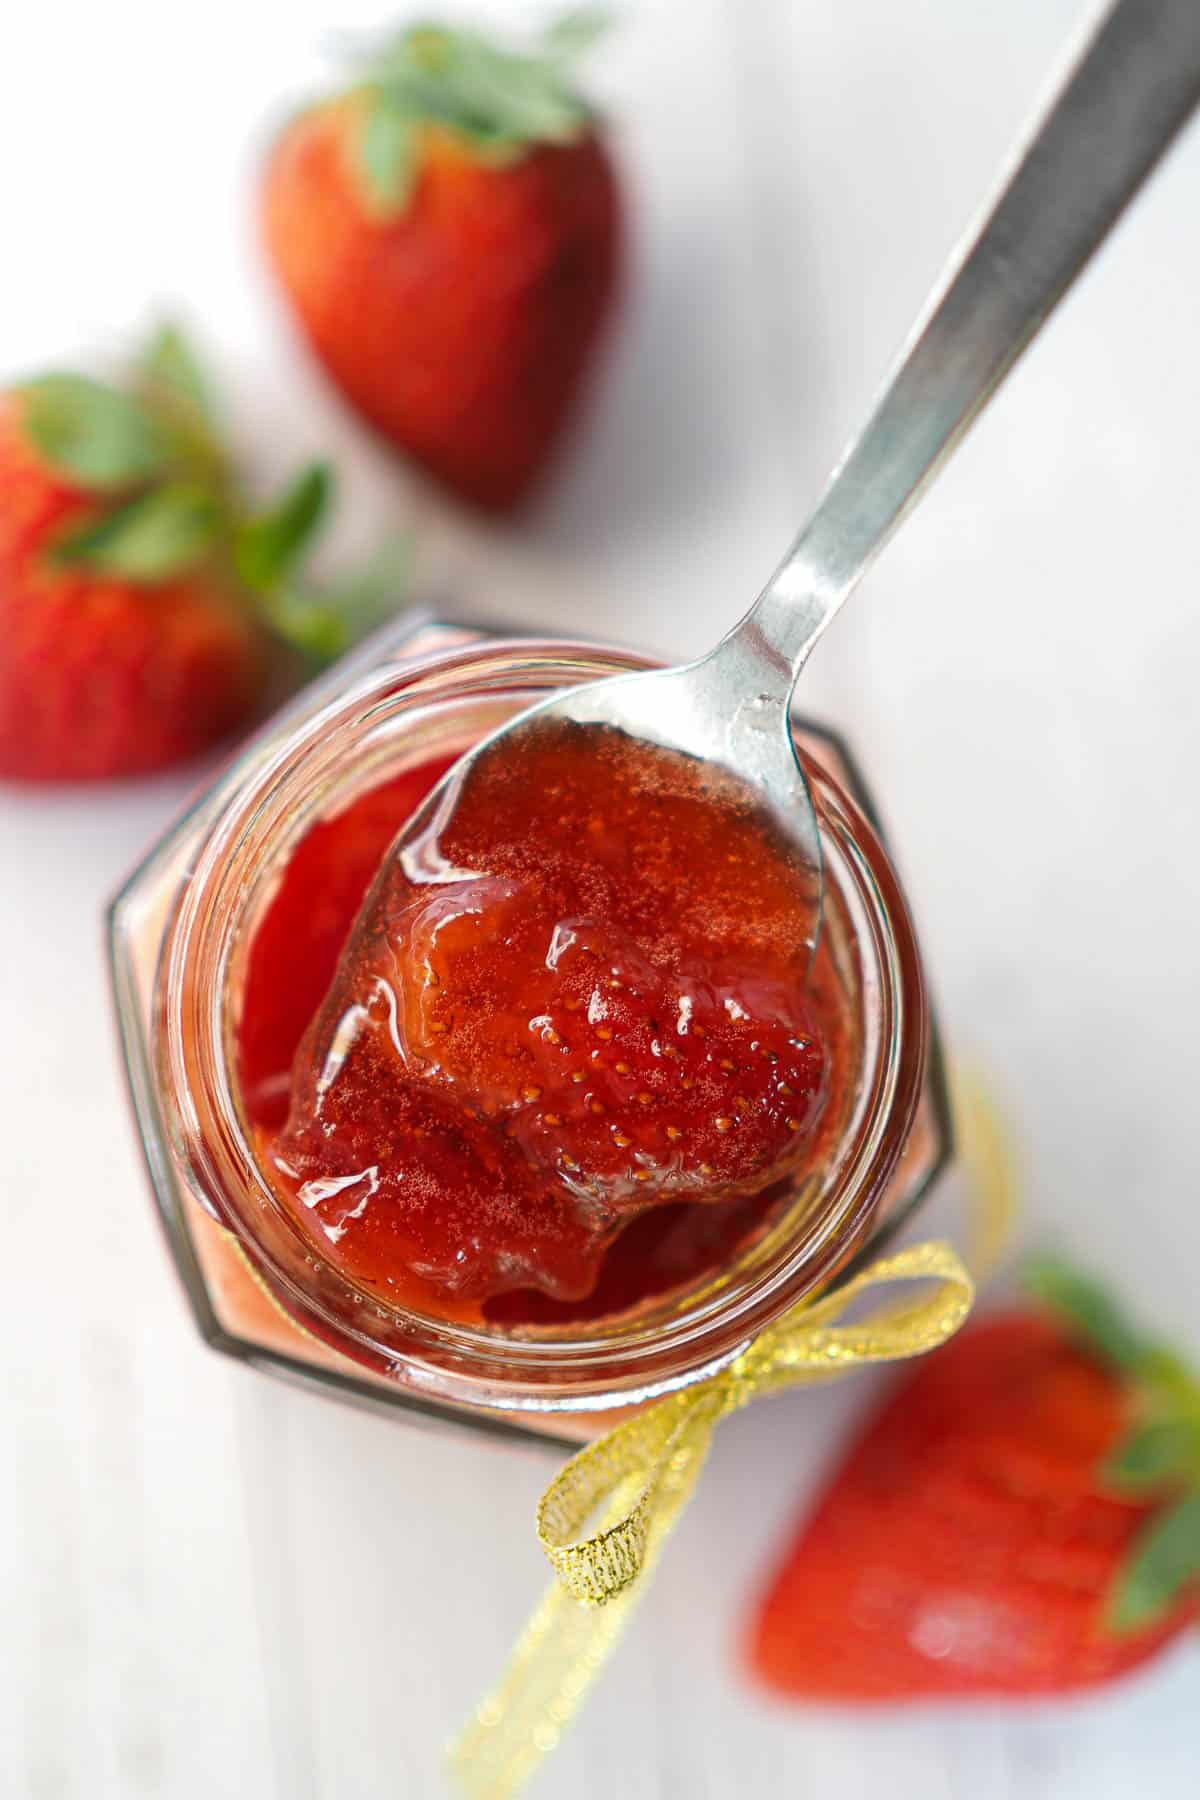 Top view of a jar of strawberry filling. A spoon is on top, filled with the filling.